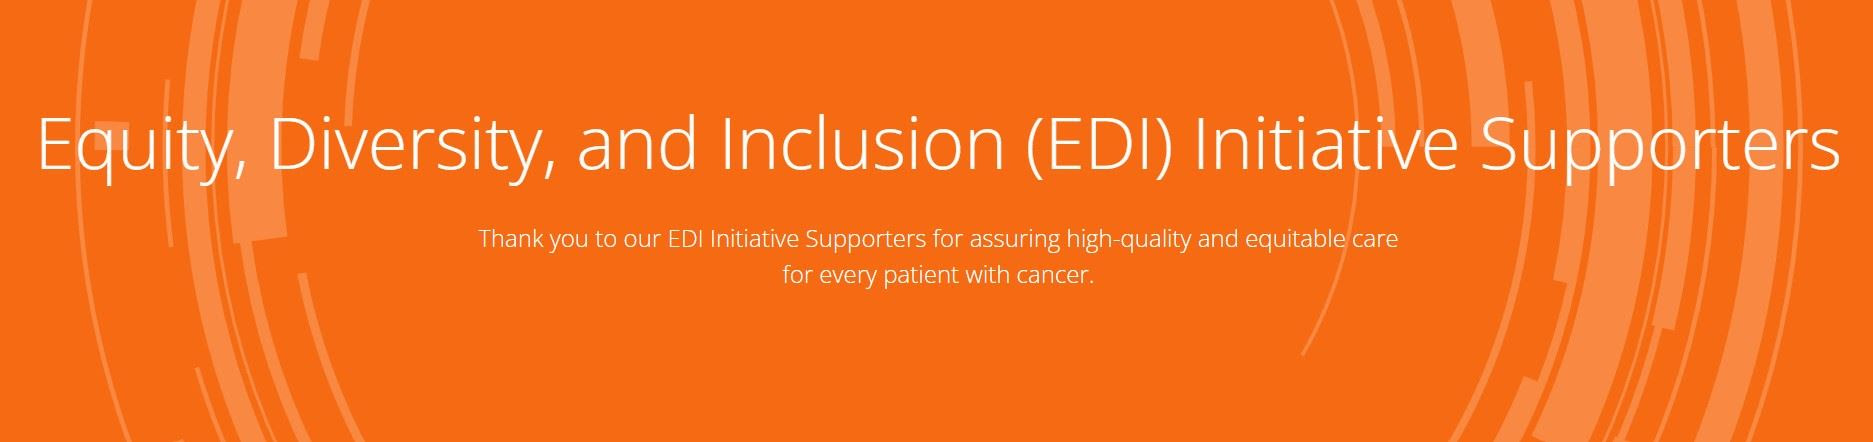 Equity, Diversity and Inclusion (EDI) Initiative Supporters - Thank you to our EDI Initiative Supporters for assuring high-quality and equitable care for every patient with cancer. 